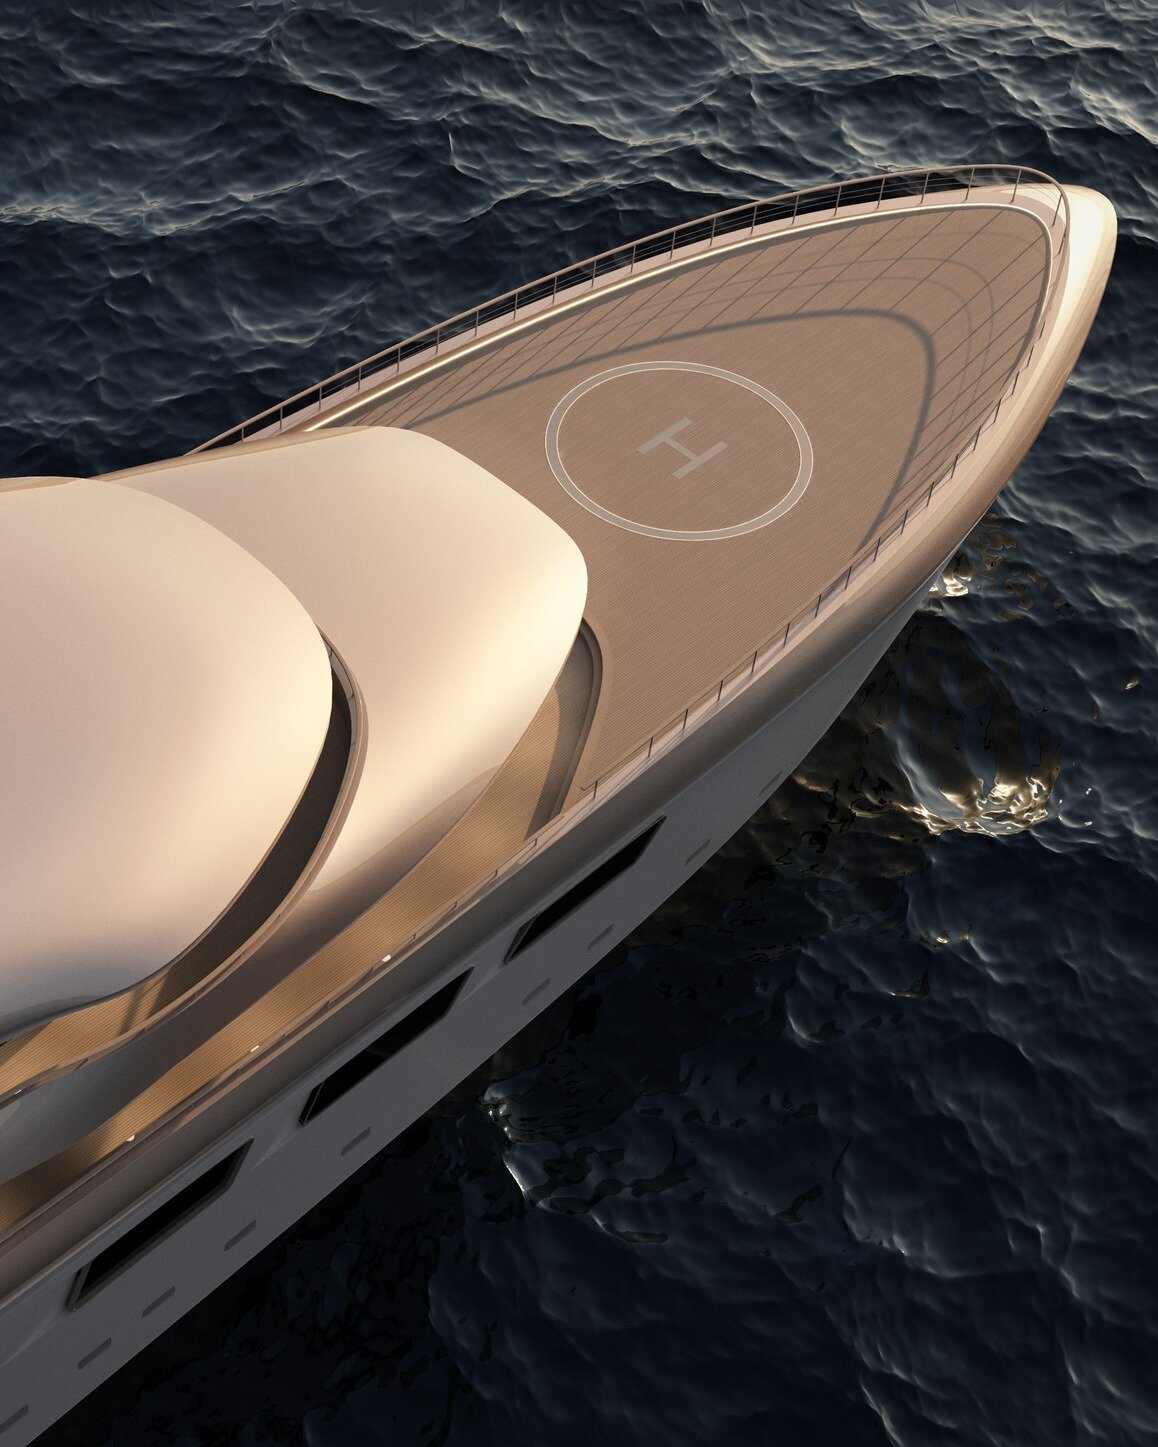 Designing moments of life, tailored around the uniqueness of our clients

Project: Dunes Yacht, part of Simply Custom Collection @oceancoyacht

#thetouchyachting